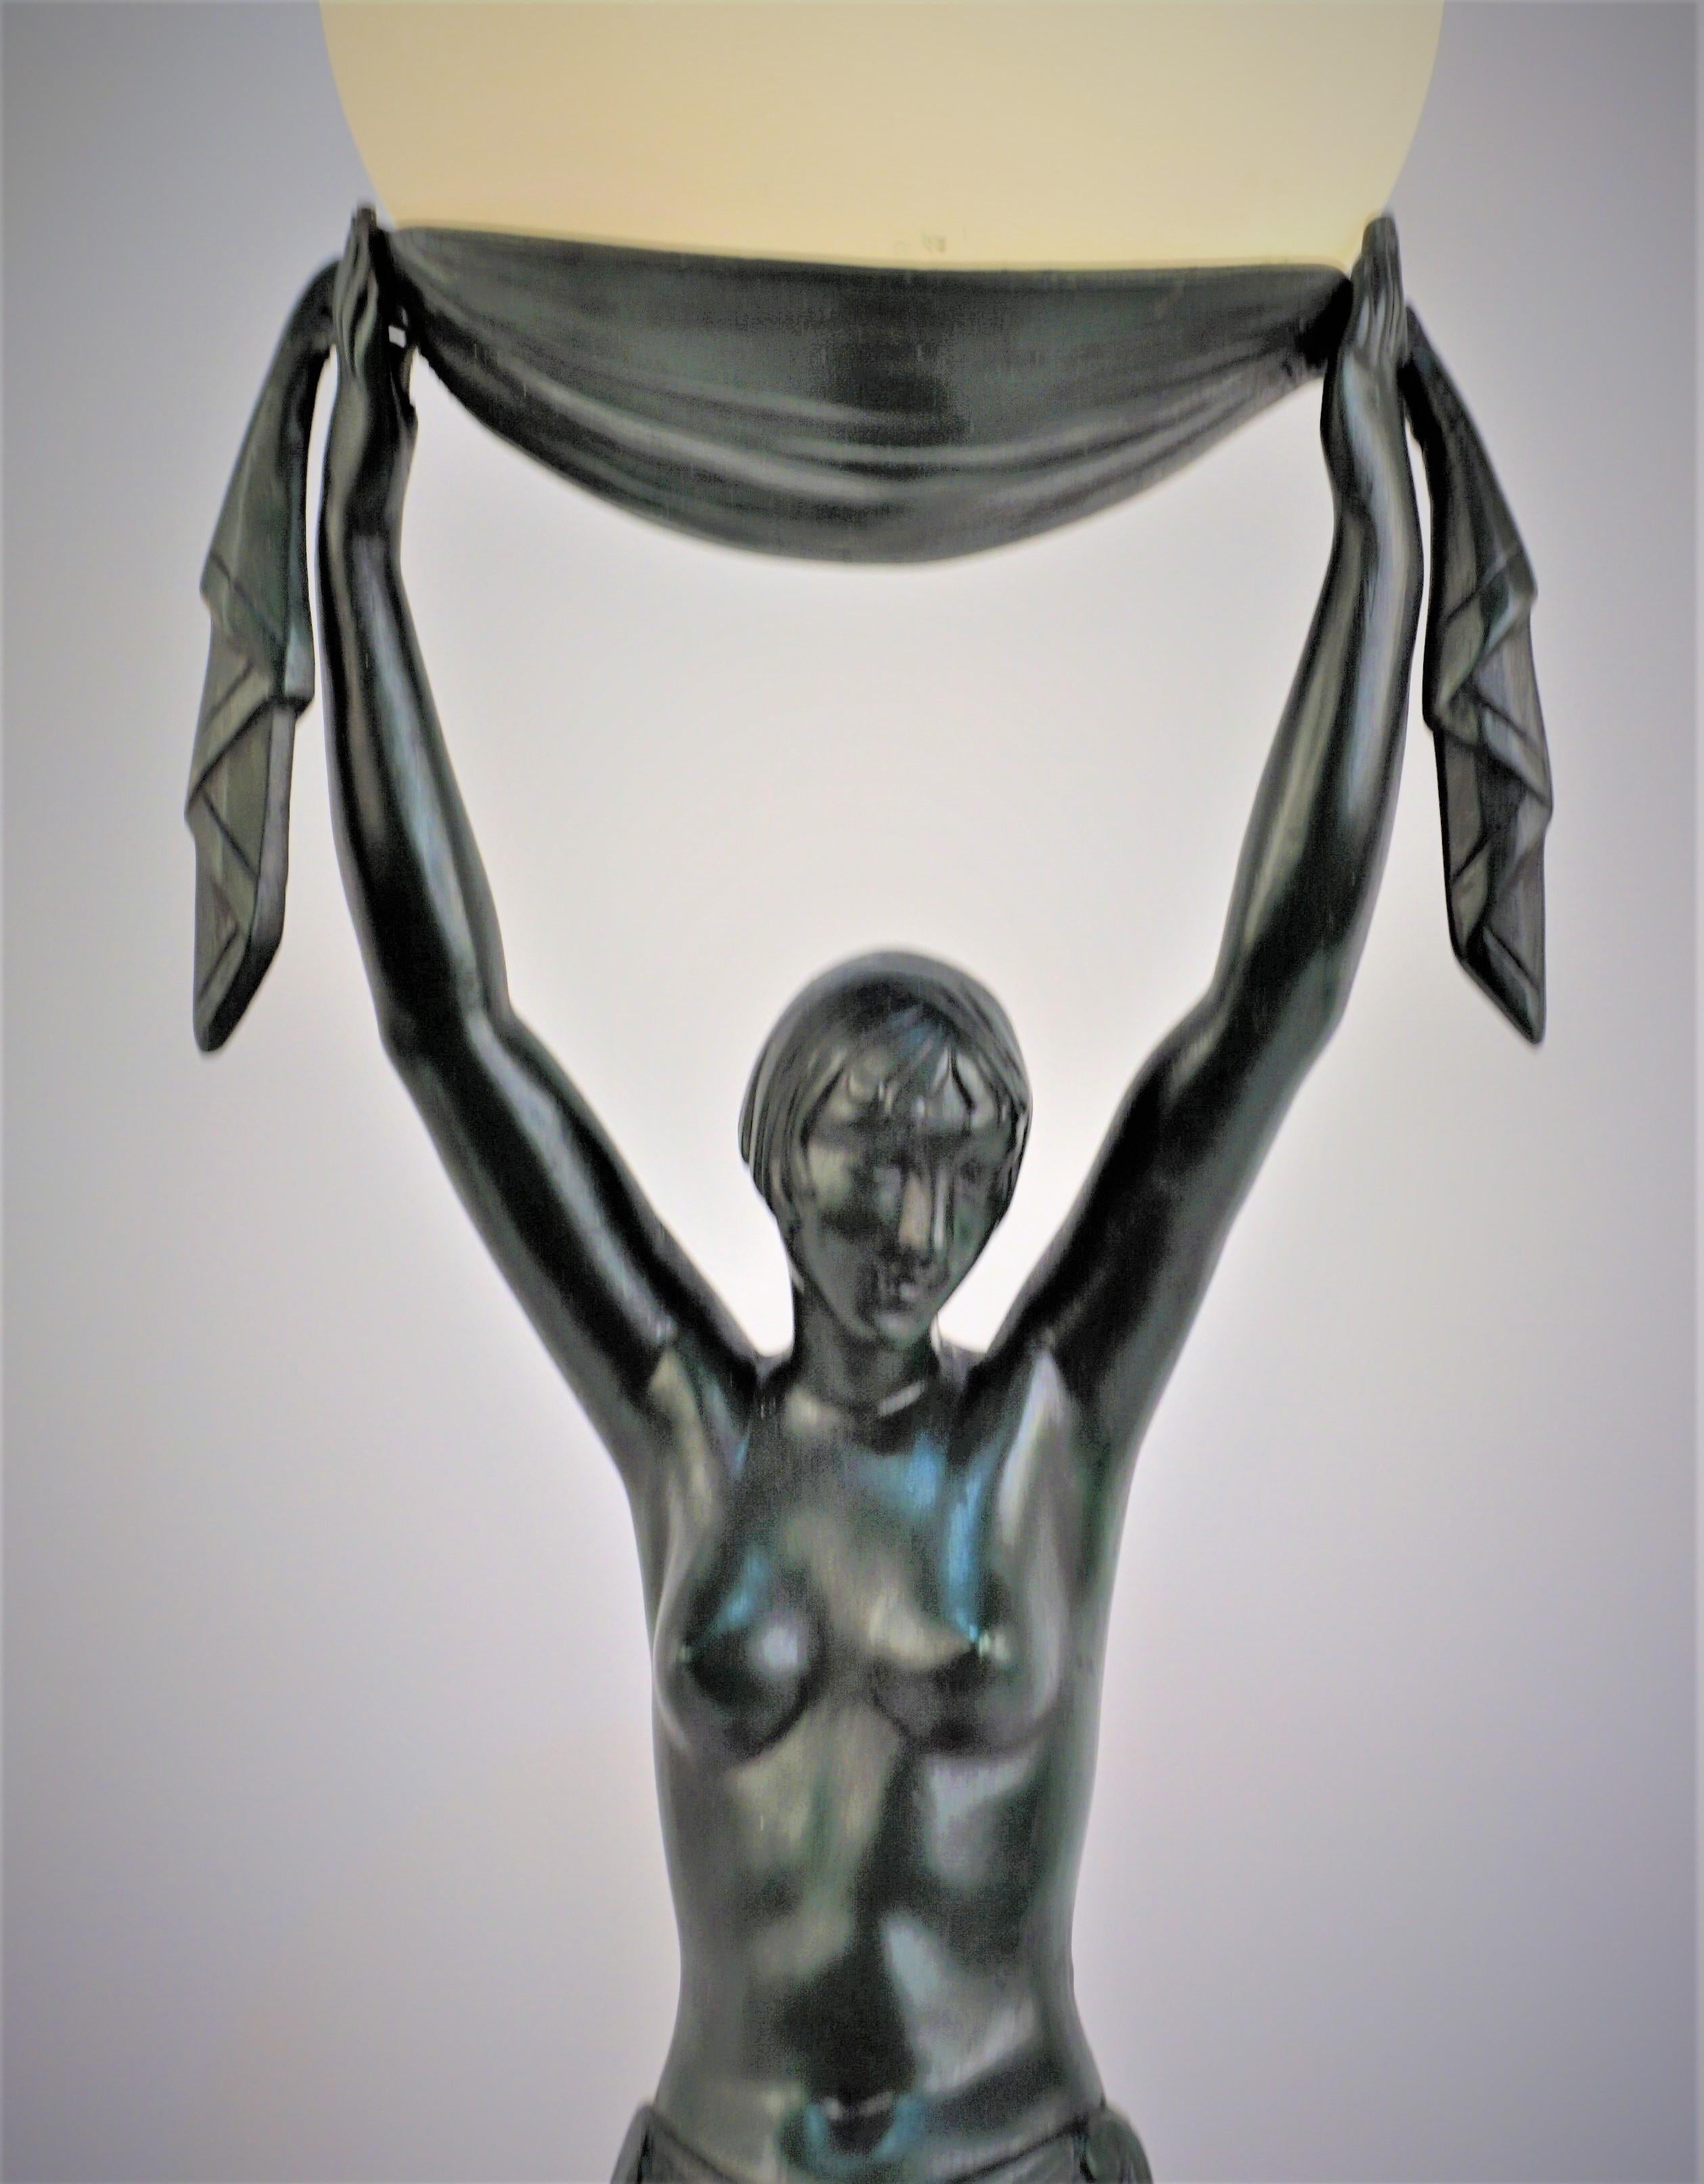 Beautiful Art Deco dark green with black patinated metal sculptural table lamp by Pierre Le Faguays, France c. 1930. It depicts a female standing on a marble base holding glob glass shade above her head.
*Signed 